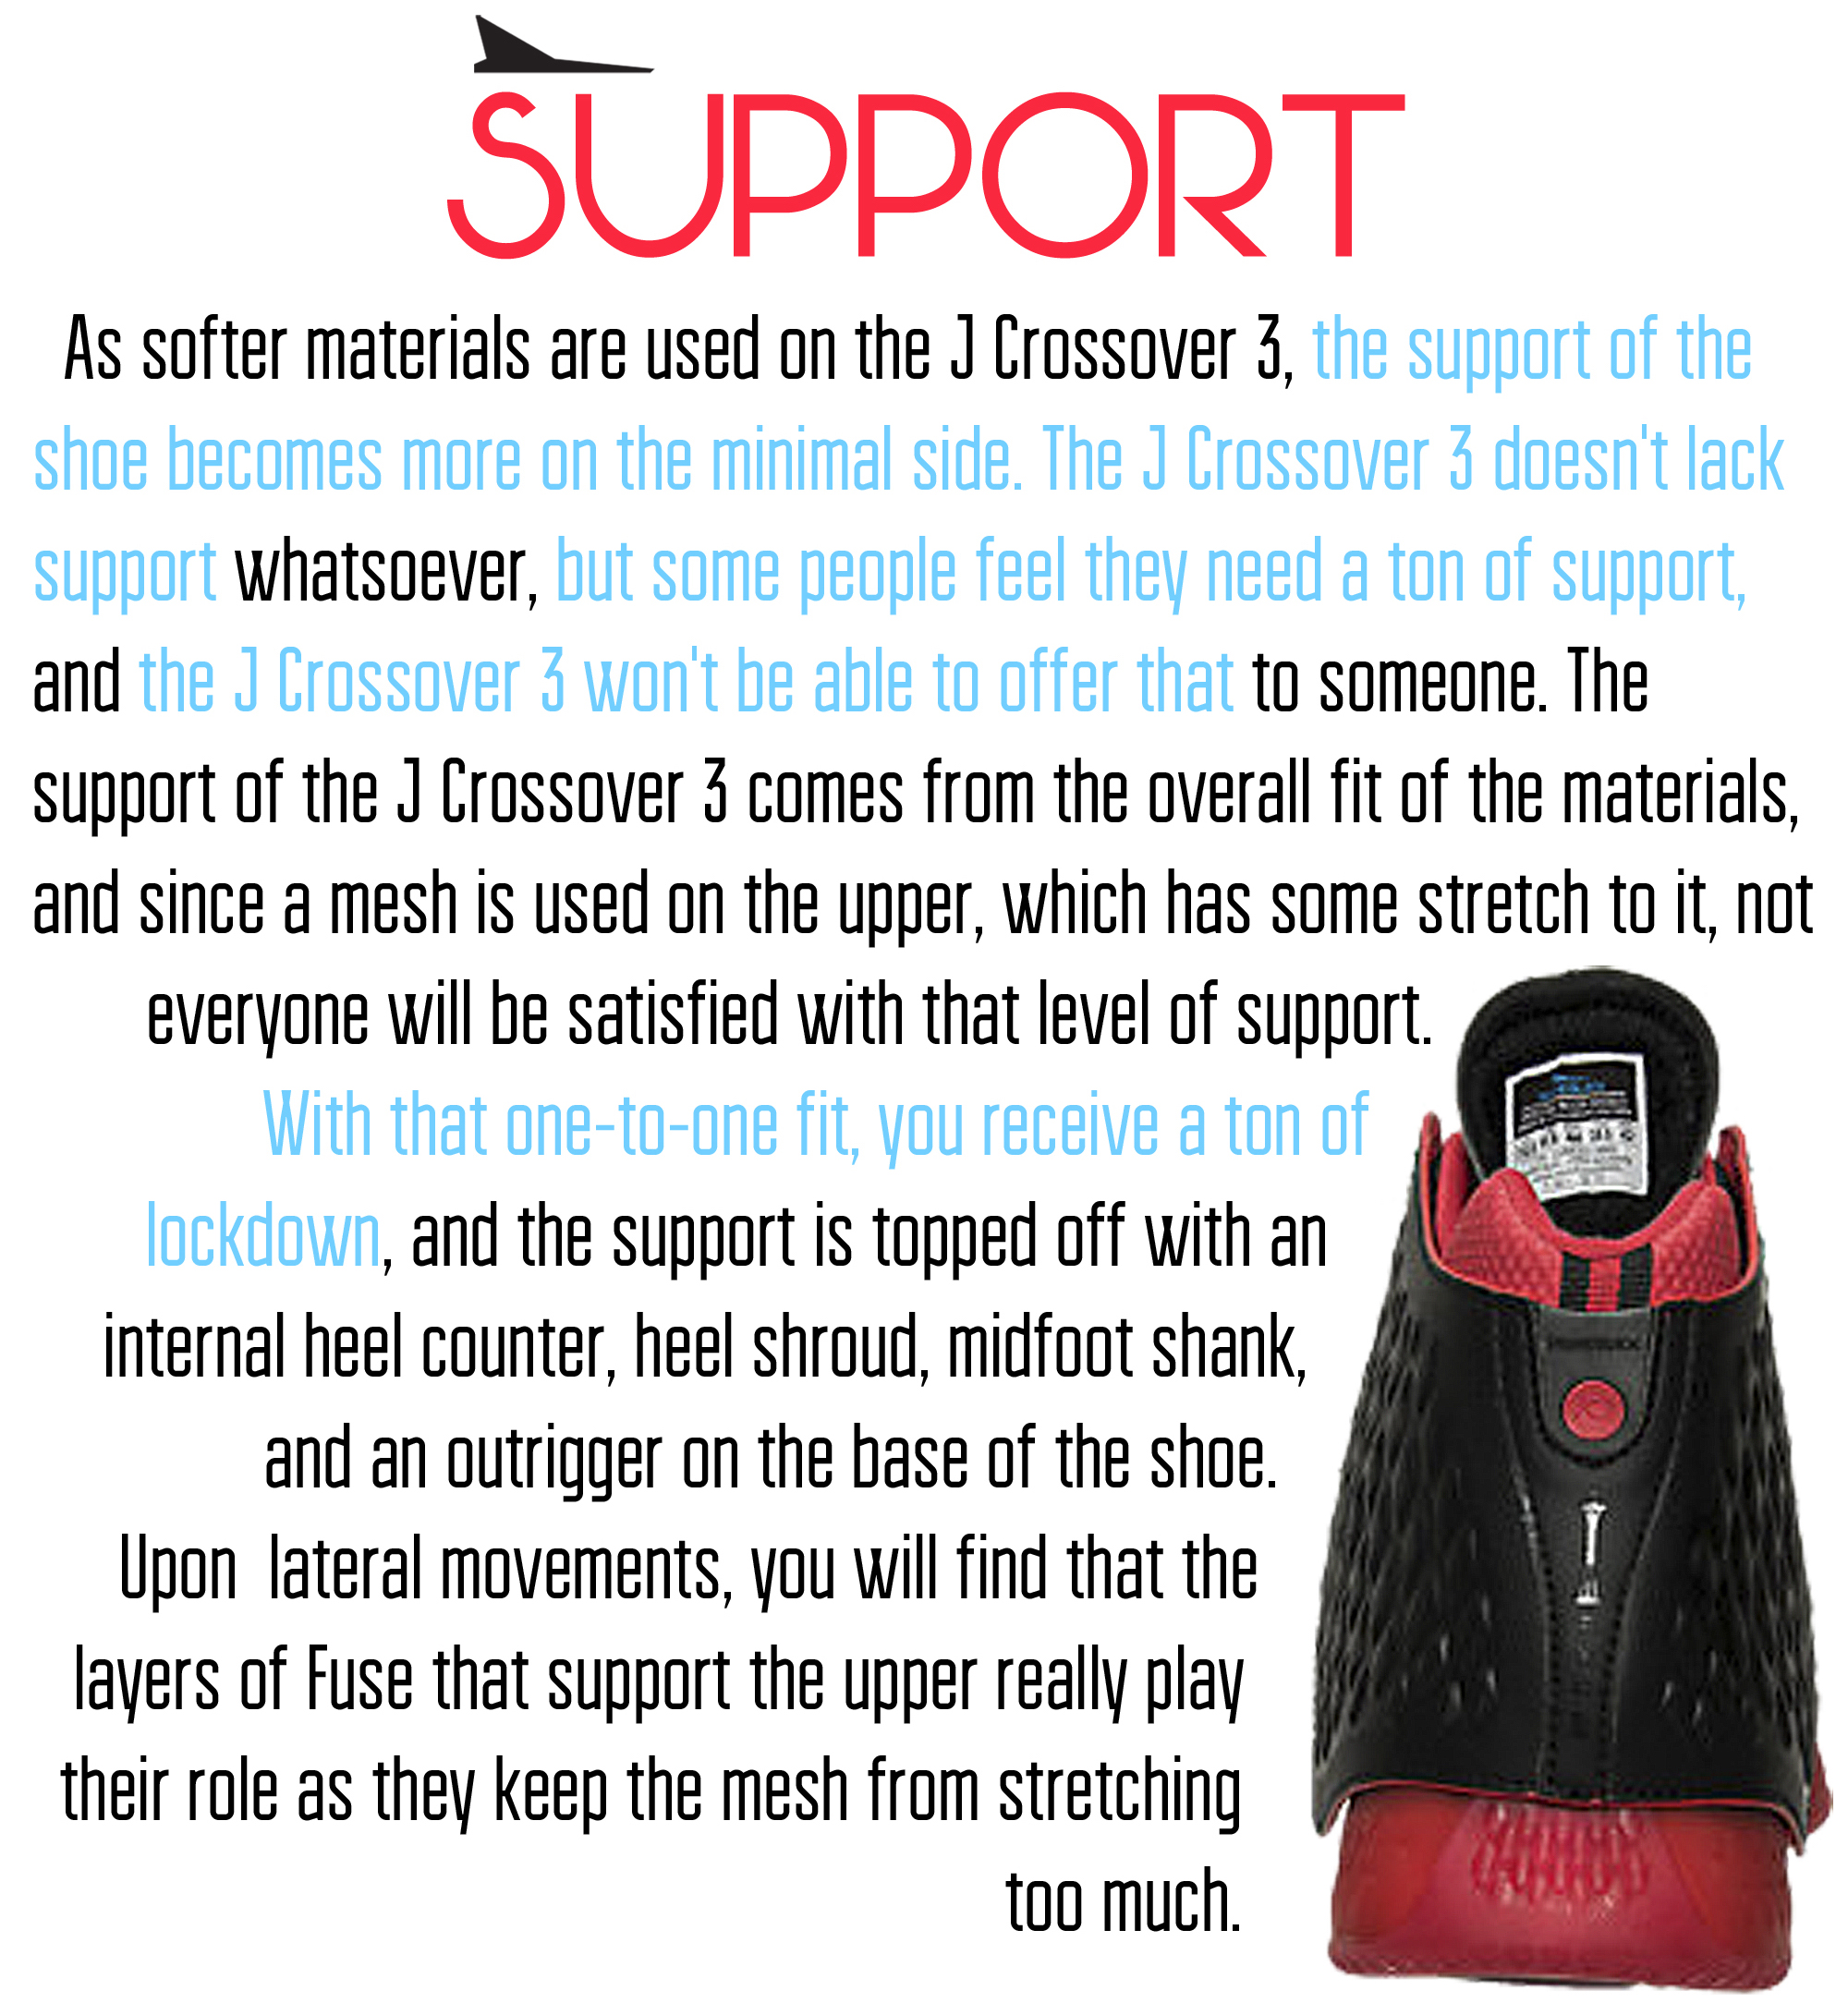 J Crossover 3 - Support